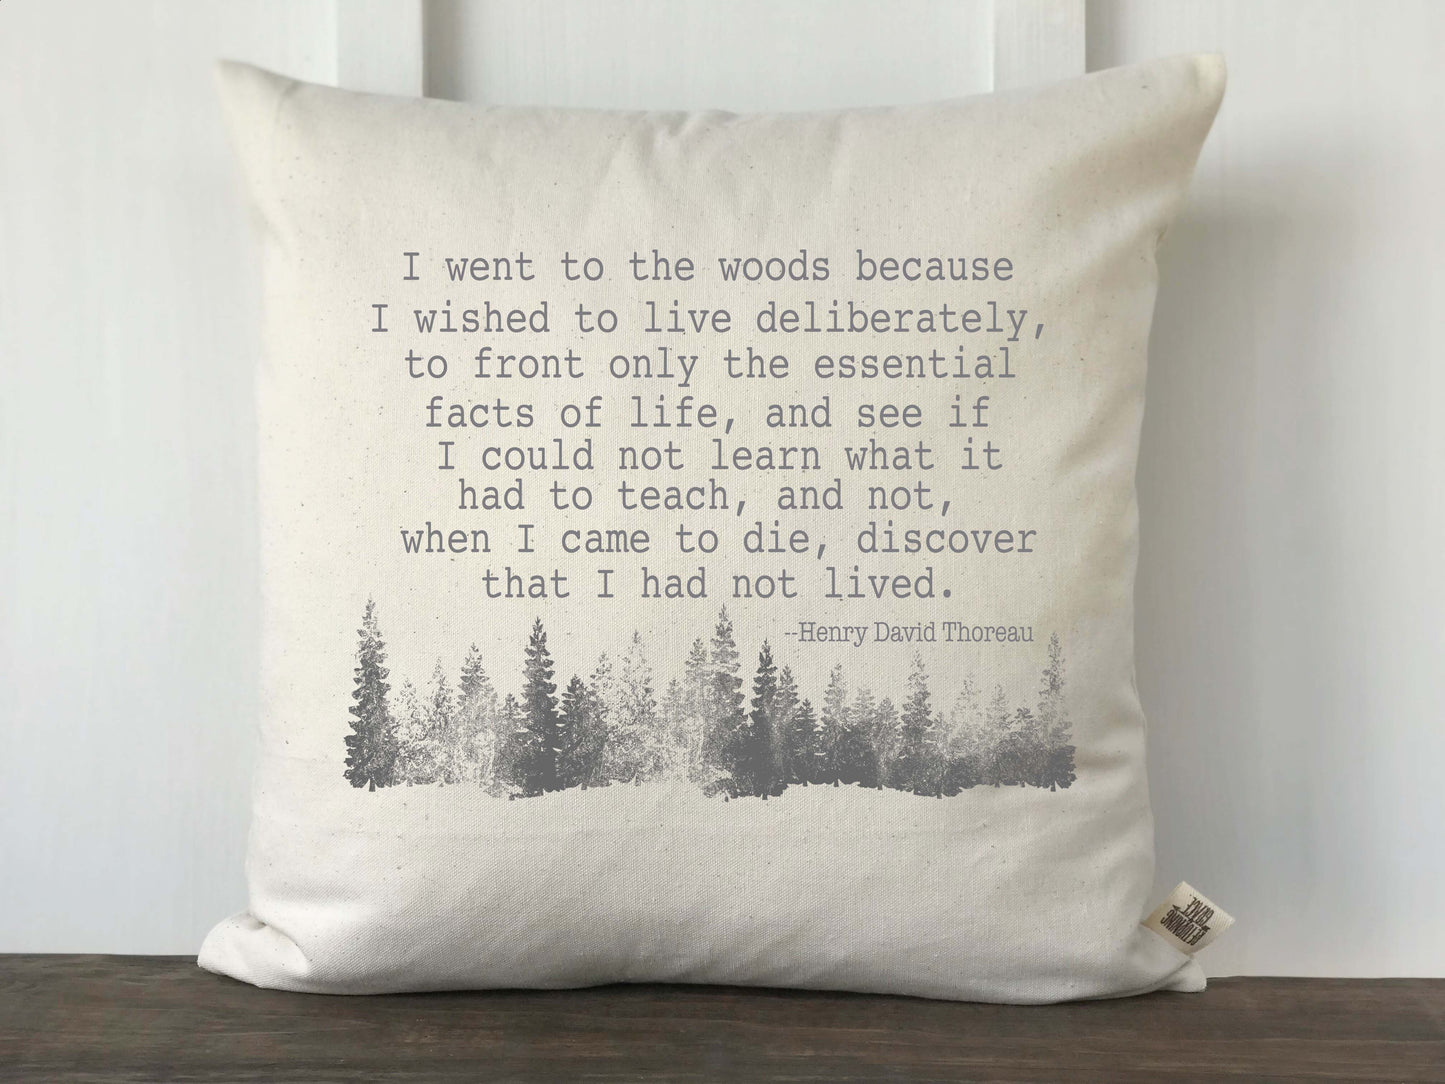 I Went to the Woods to Live Deliberately Pillow Cover - Returning Grace Designs